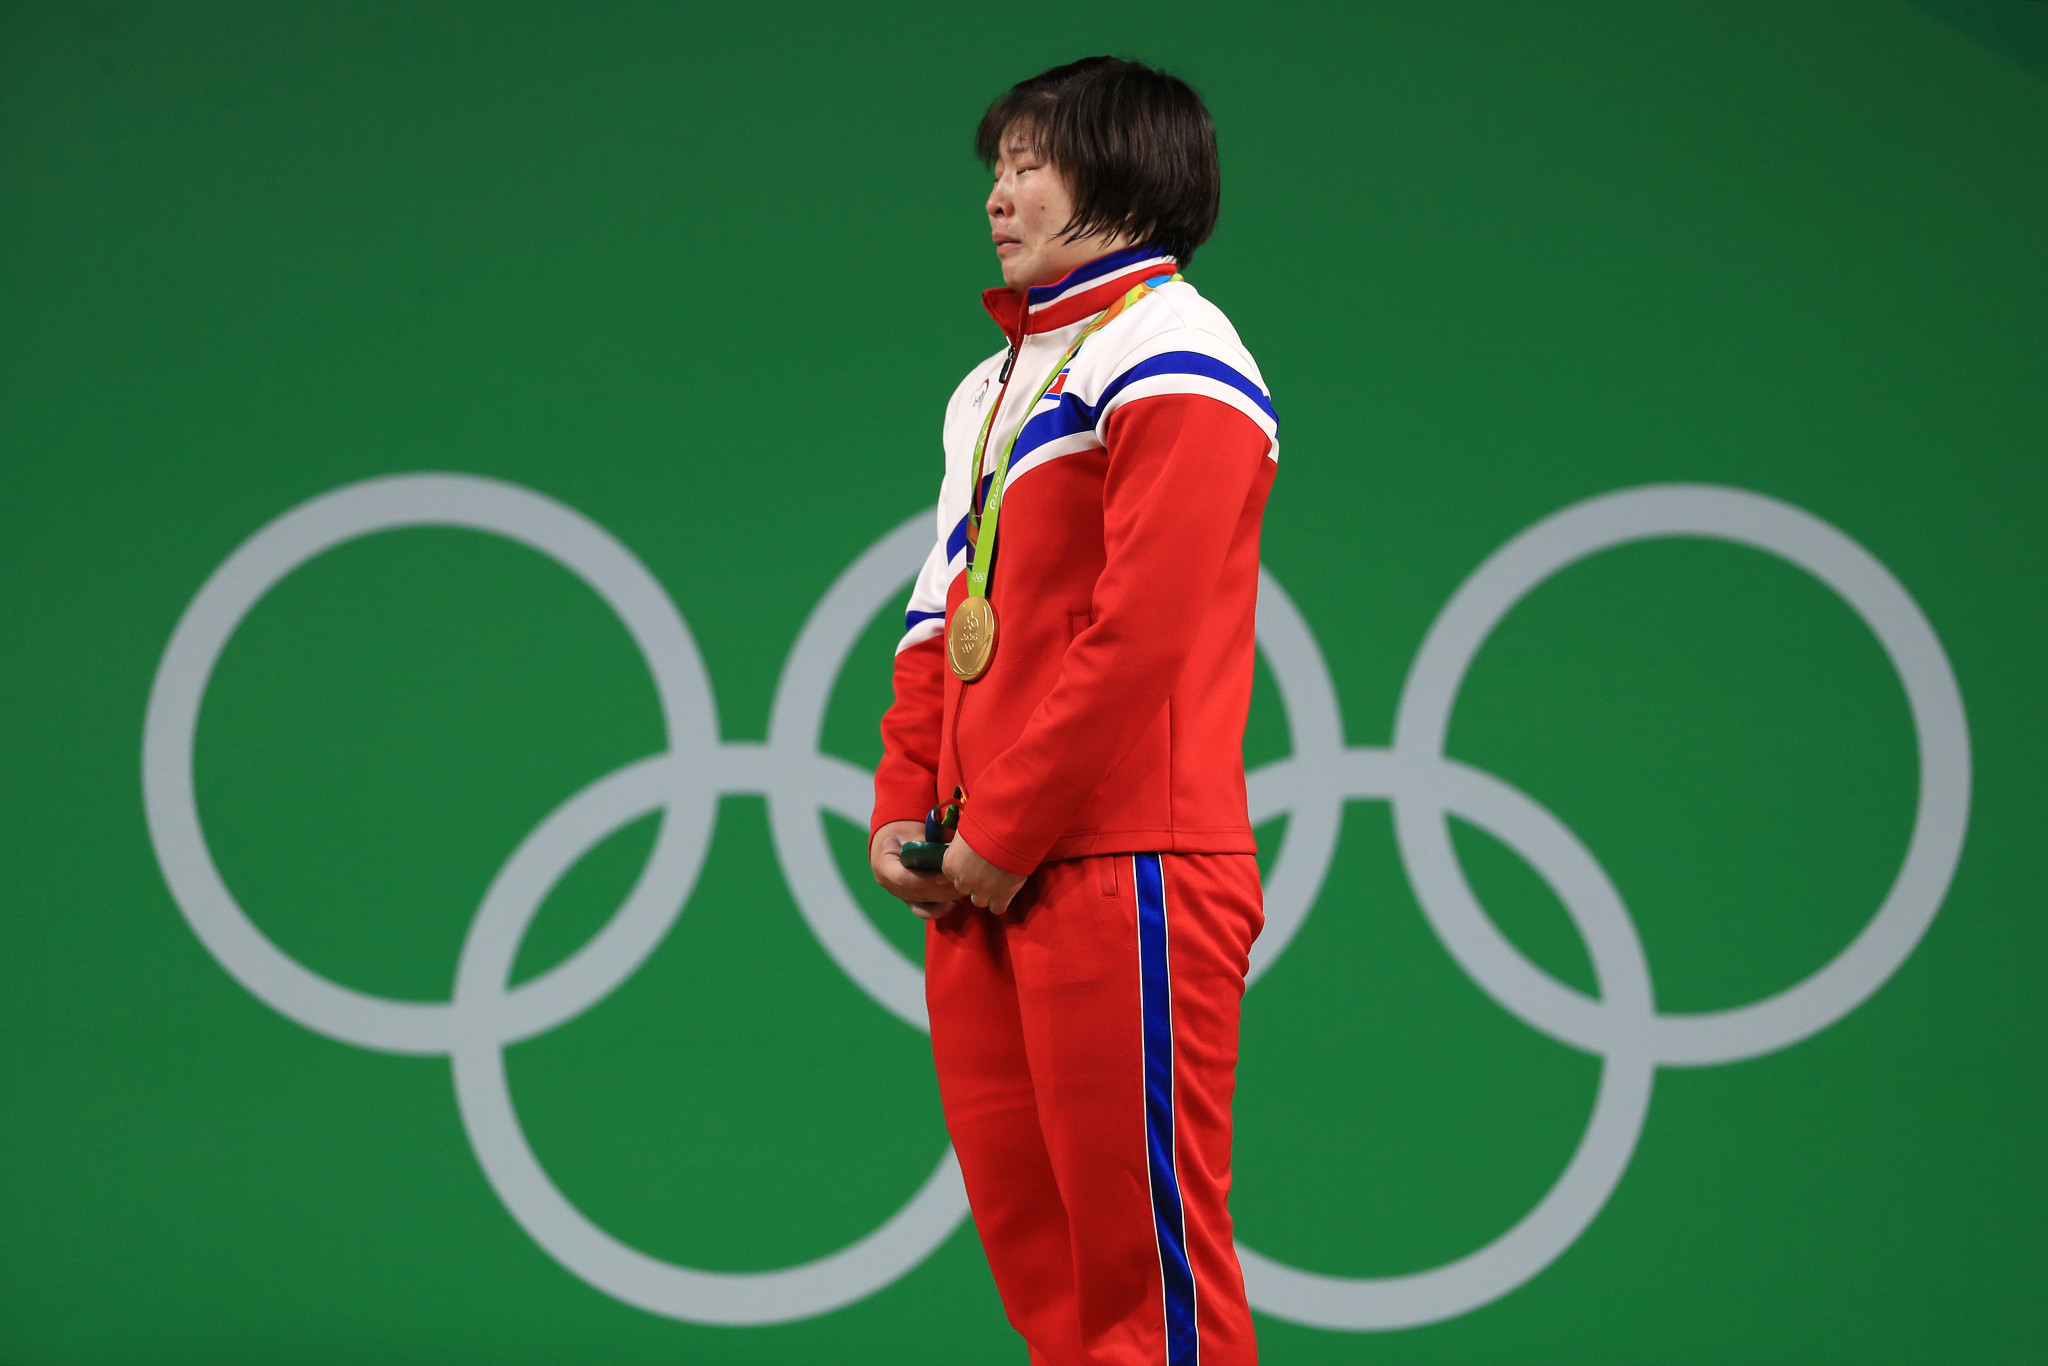 Kim Chun Hui was the personal coach of double Olympic champion Rim Jong-sim who has retired from the sport and is now a mother ©Getty Images